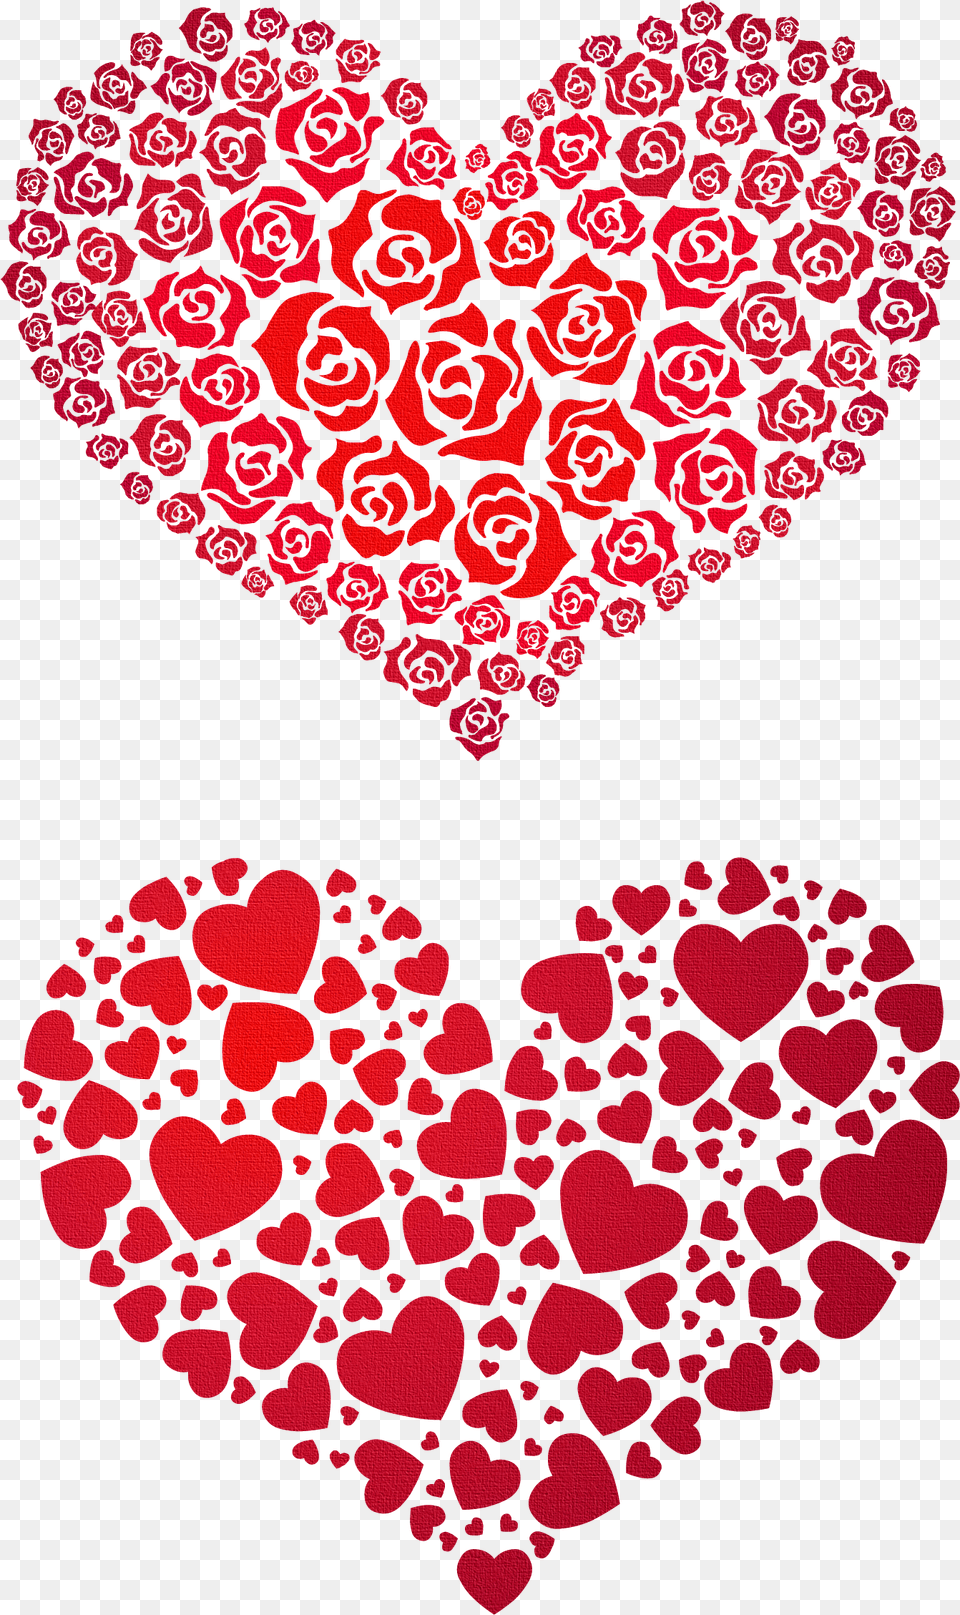 Library Of Free Image Download Heart Outline Hearts Valentine Png